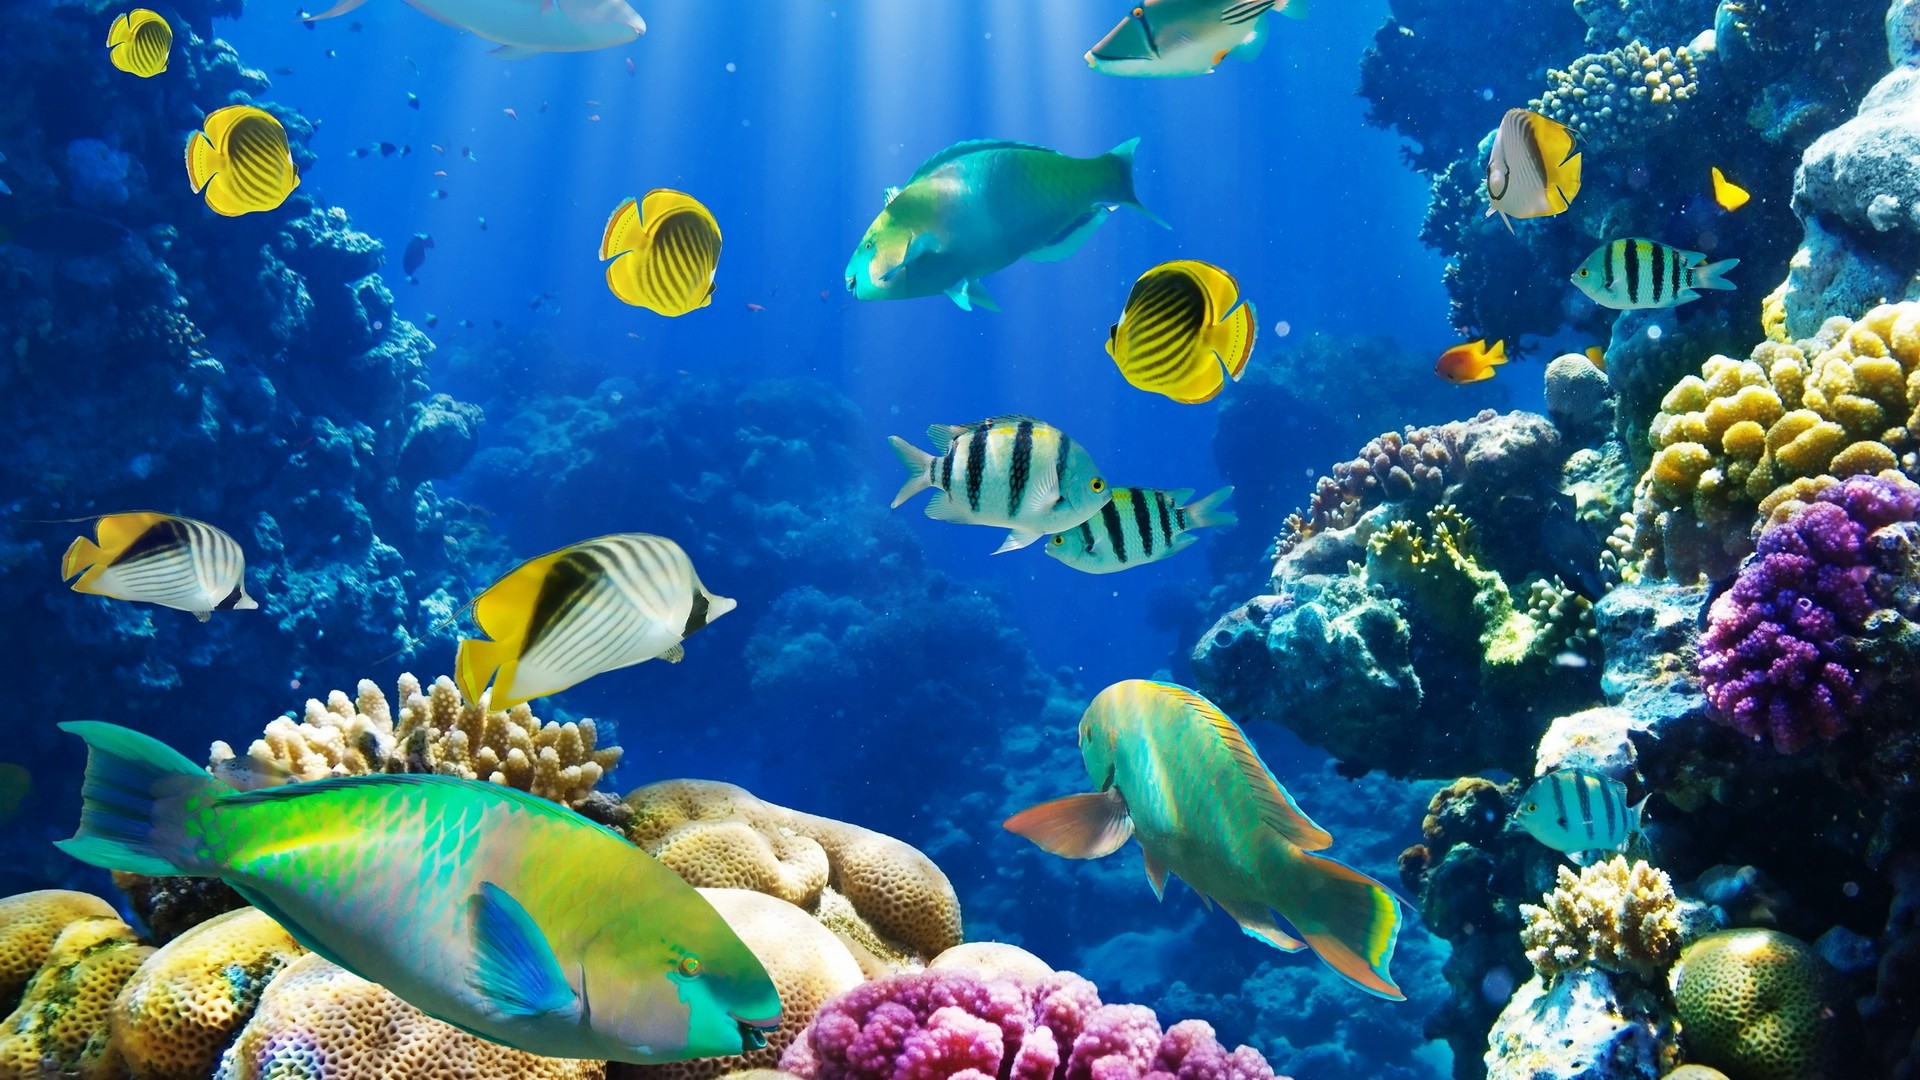 1920x1080 nature fish coral reef exotic Â· Coral WallpaperFish WallpaperBackground Hd  ...